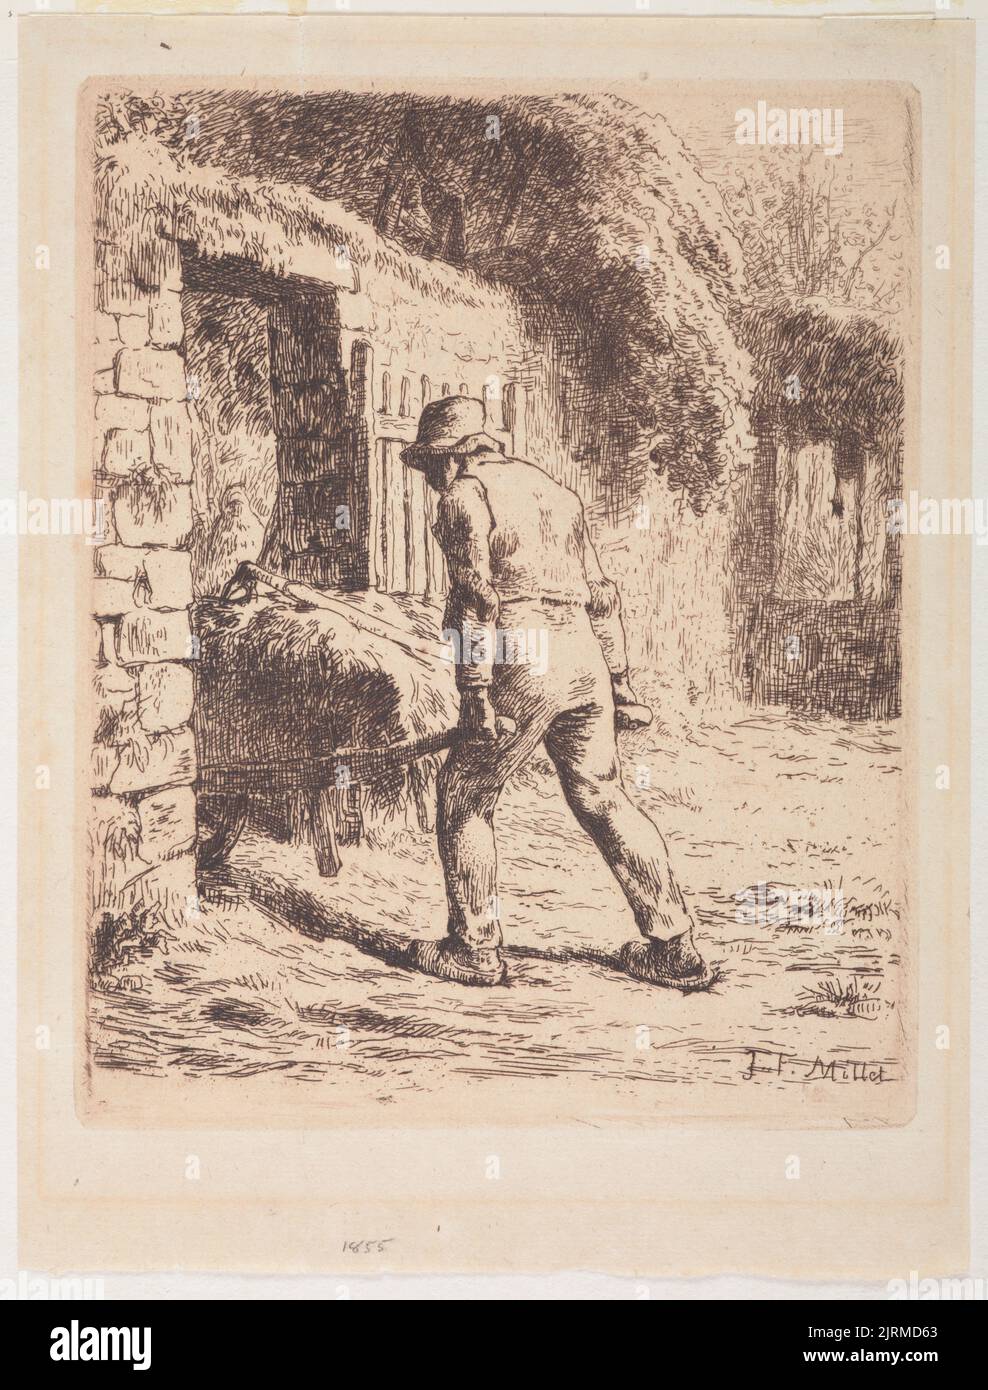 Man with a wheelbarrow (Le paysan rentrant du fumier), 1855, France, by Jean-François Millet. Gift of Mrs Harold Wright, 1965. Stock Photo